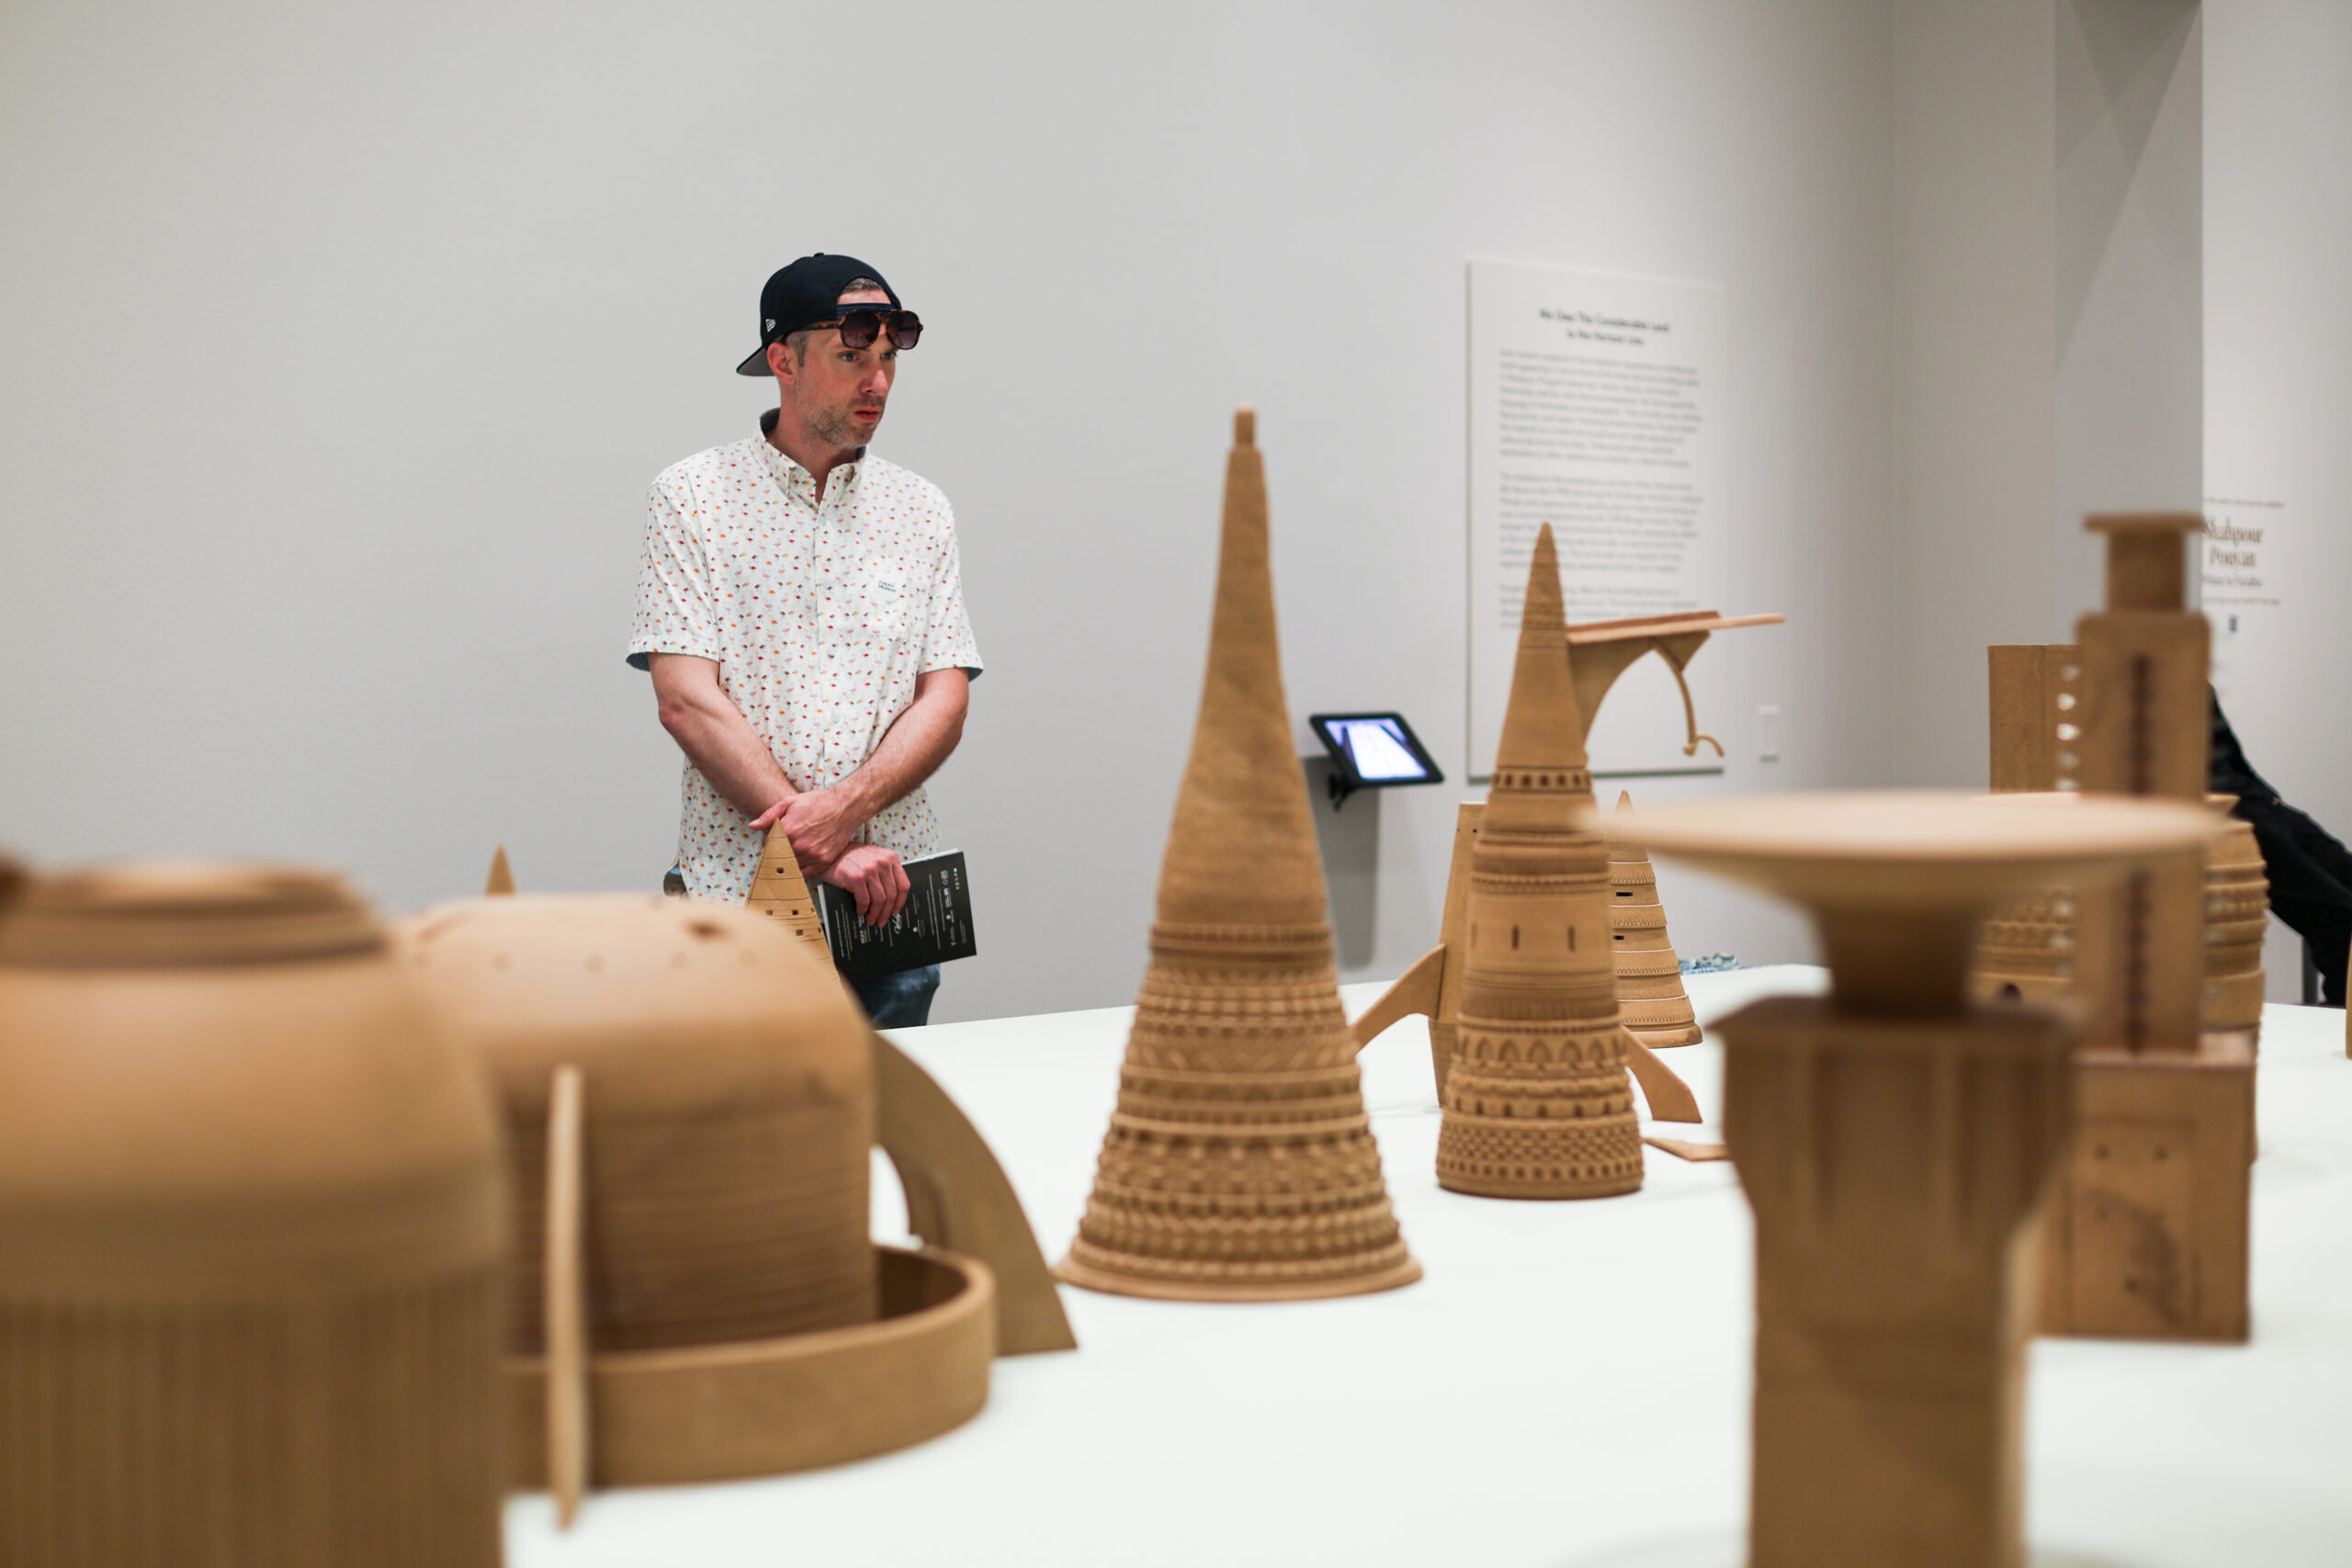 Man looking at several clay sculptures in varying shapes